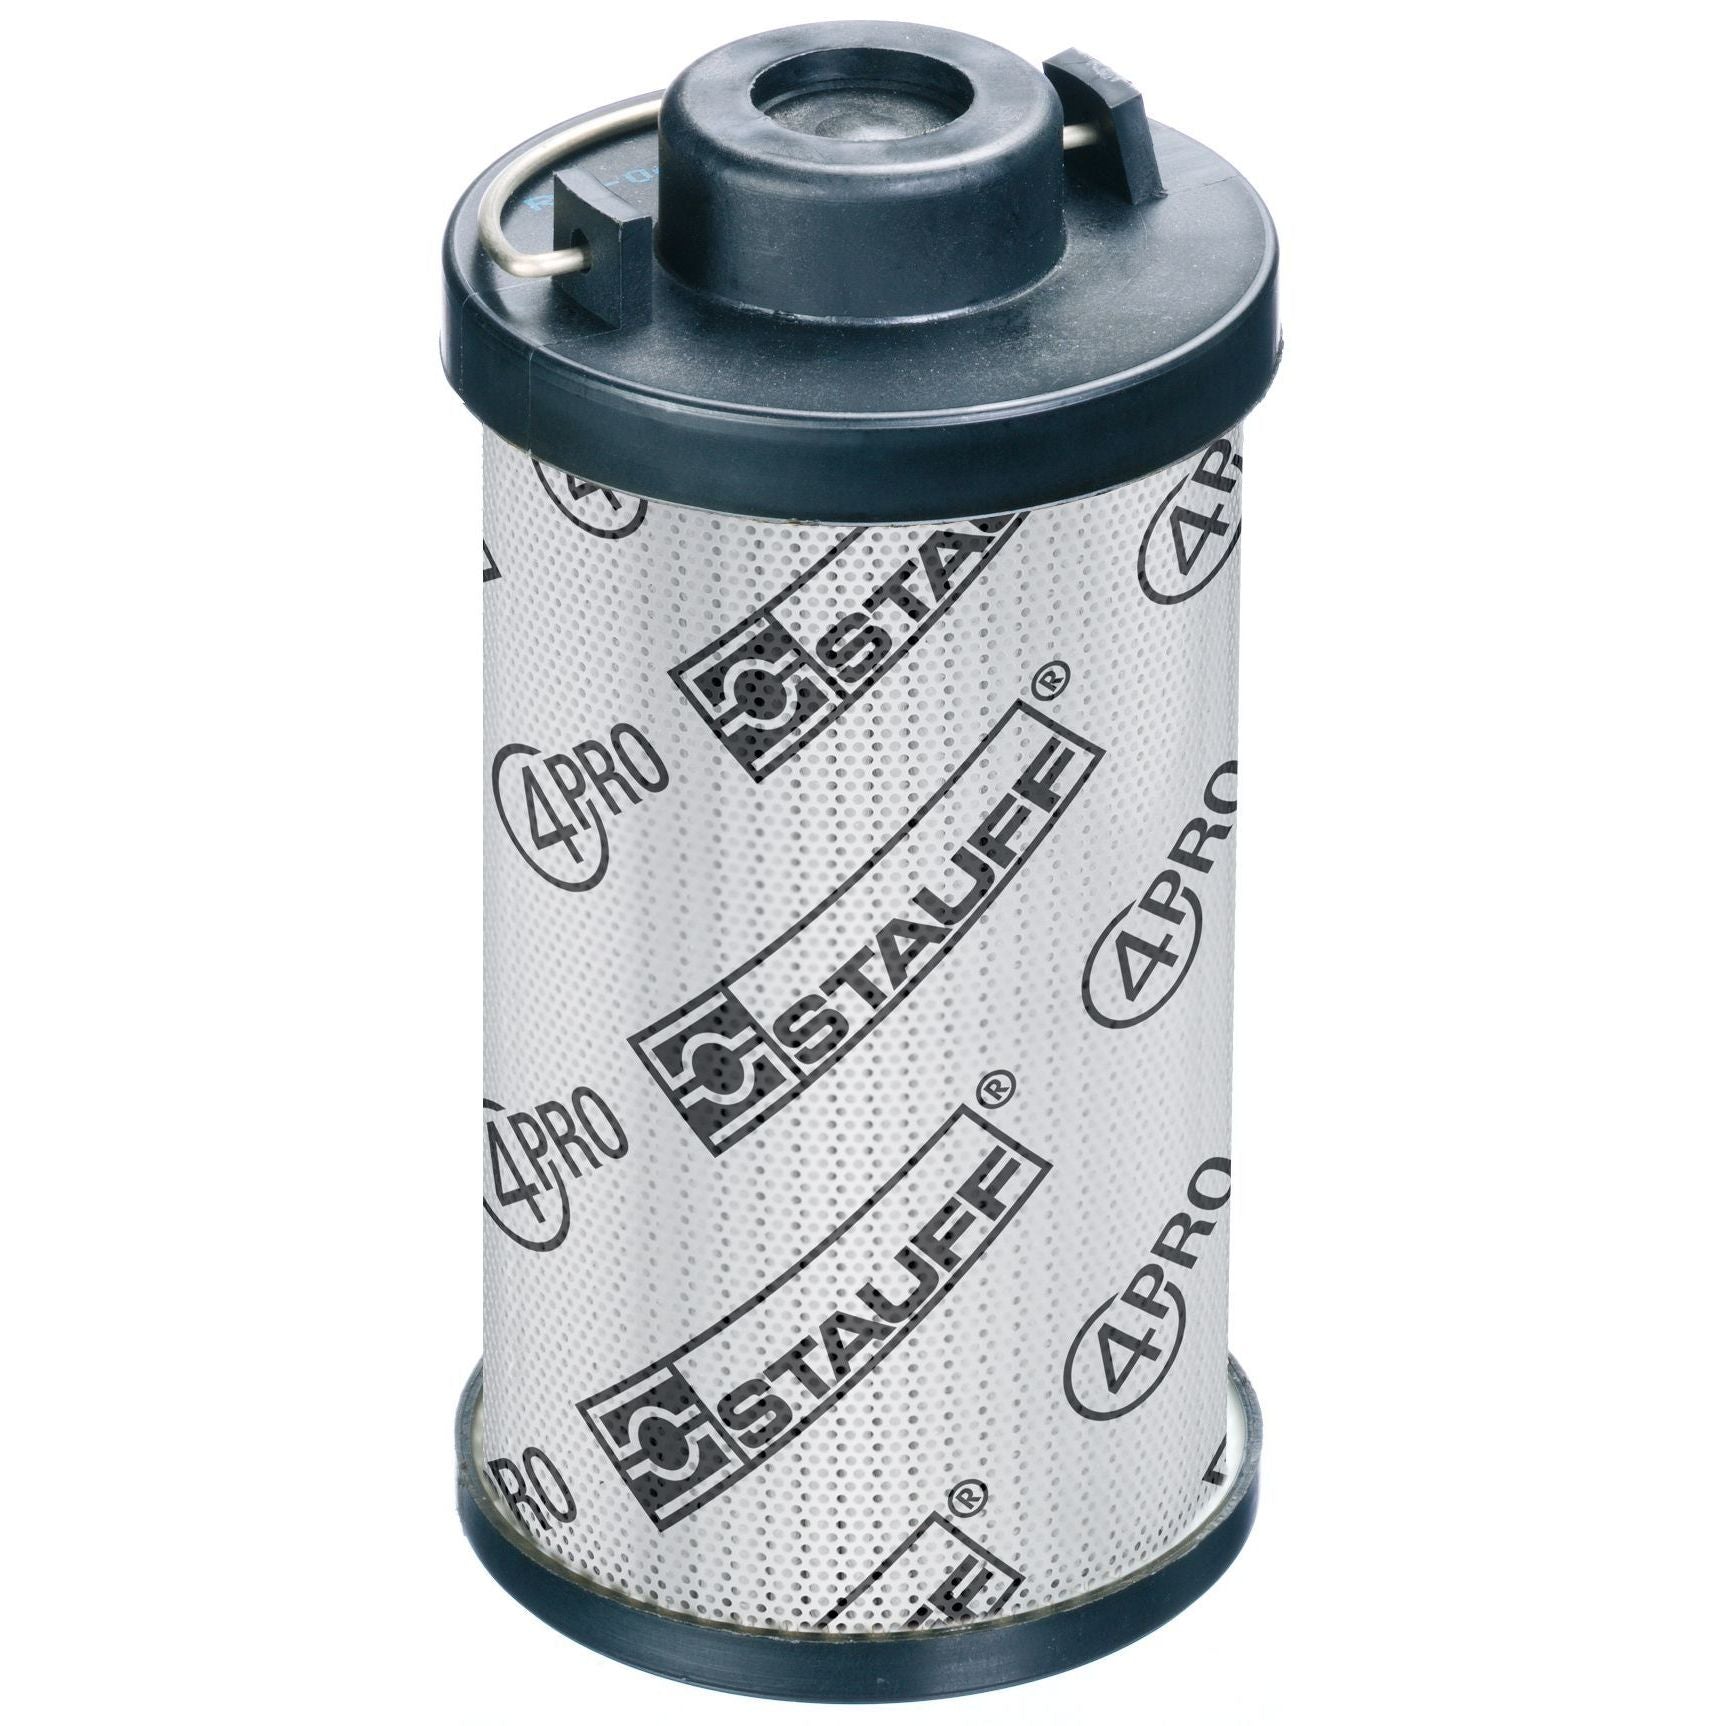 RE-160-G-20-B-B3/4 : Stauff RF-160 Series Filter Element, 20 Micron, Synthetic, 363psi Collapse Differential, Buna